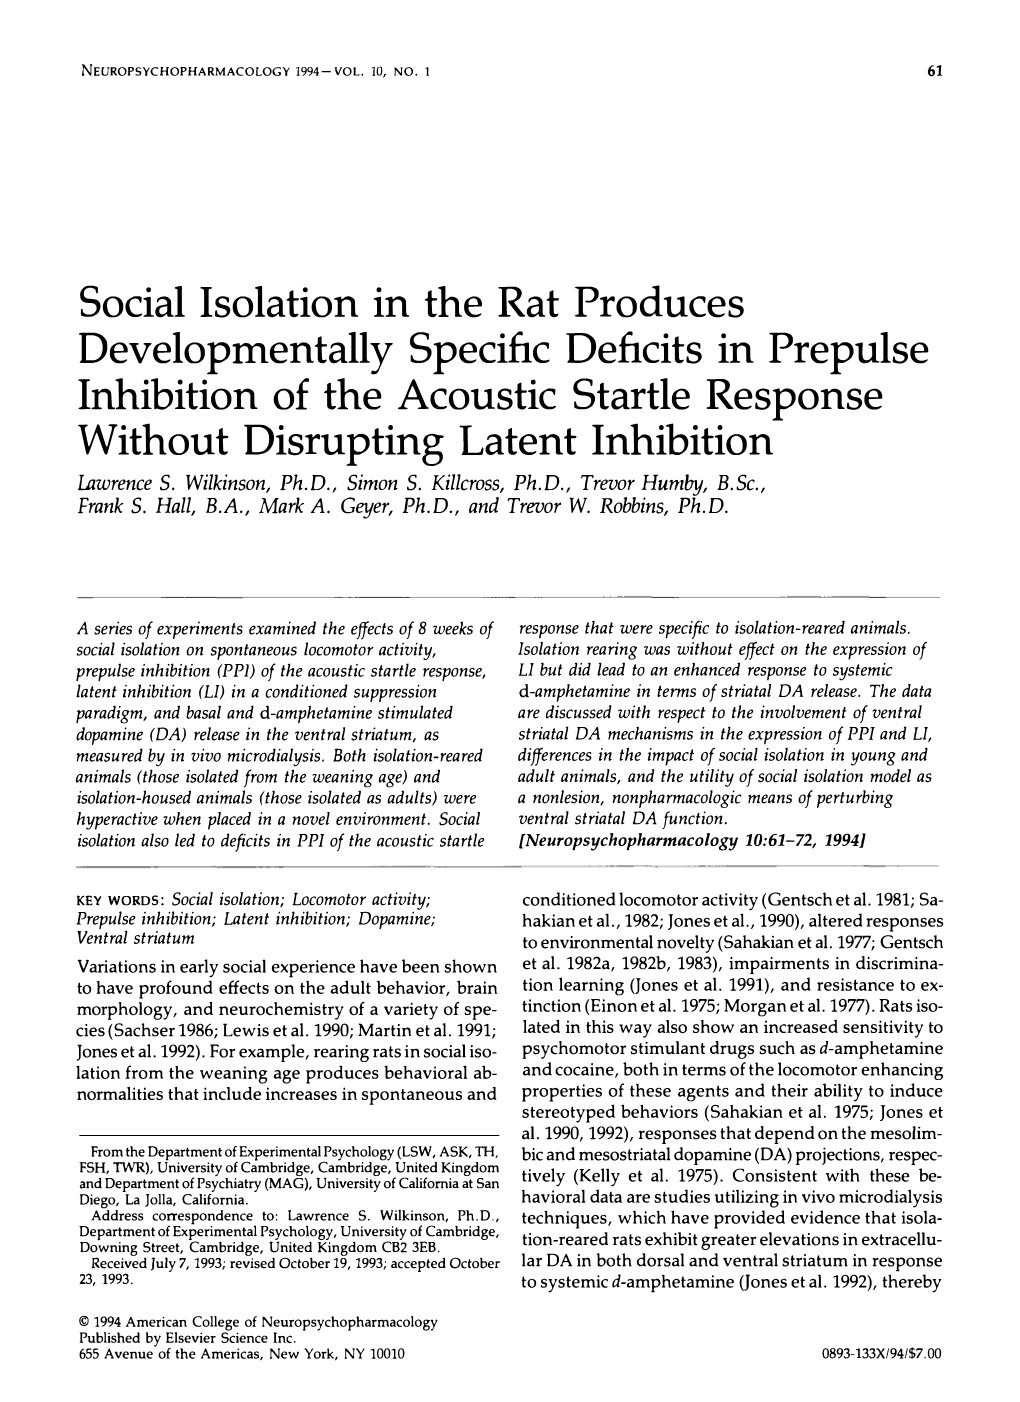 Social Isolation in the Rat Produces Developmentally Specific Deficits in Prepulse Inhibition of the Acoustic Startle Response W